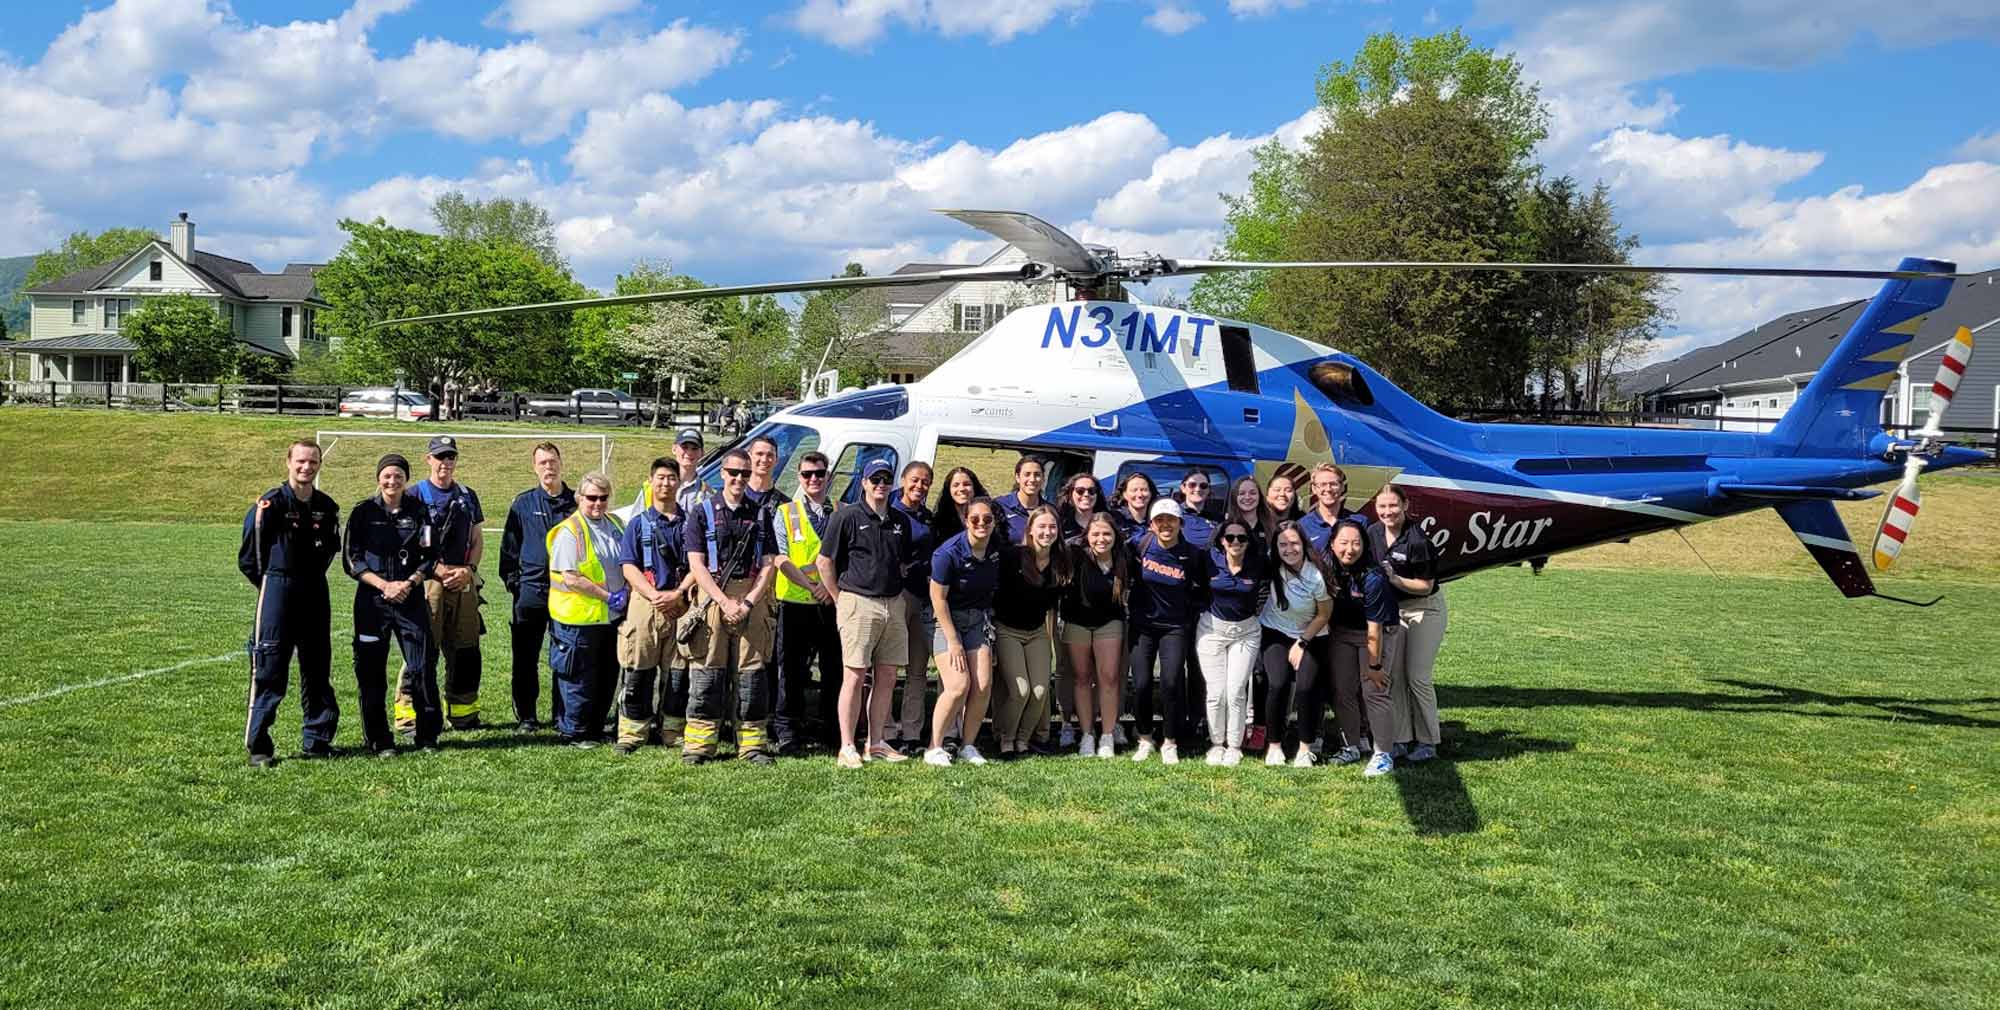 A group gathers in front of a helicopter for a photo